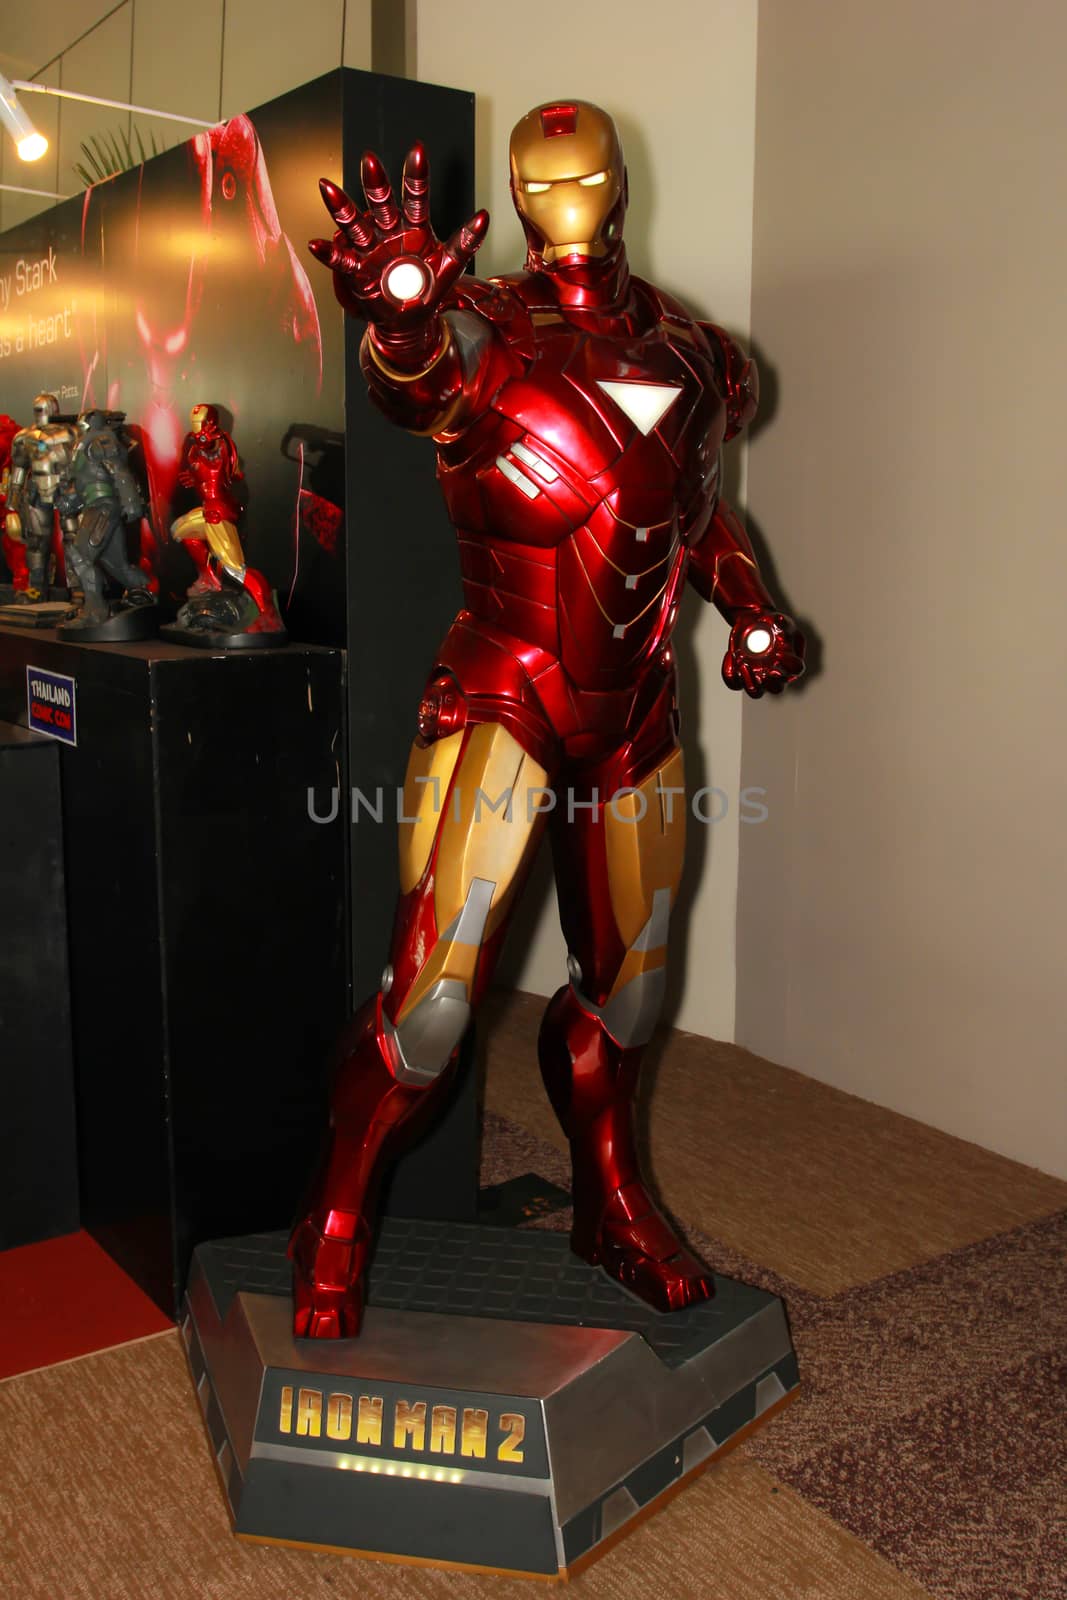 A model of the character Iron Man from the movies and comics 2 by redthirteen